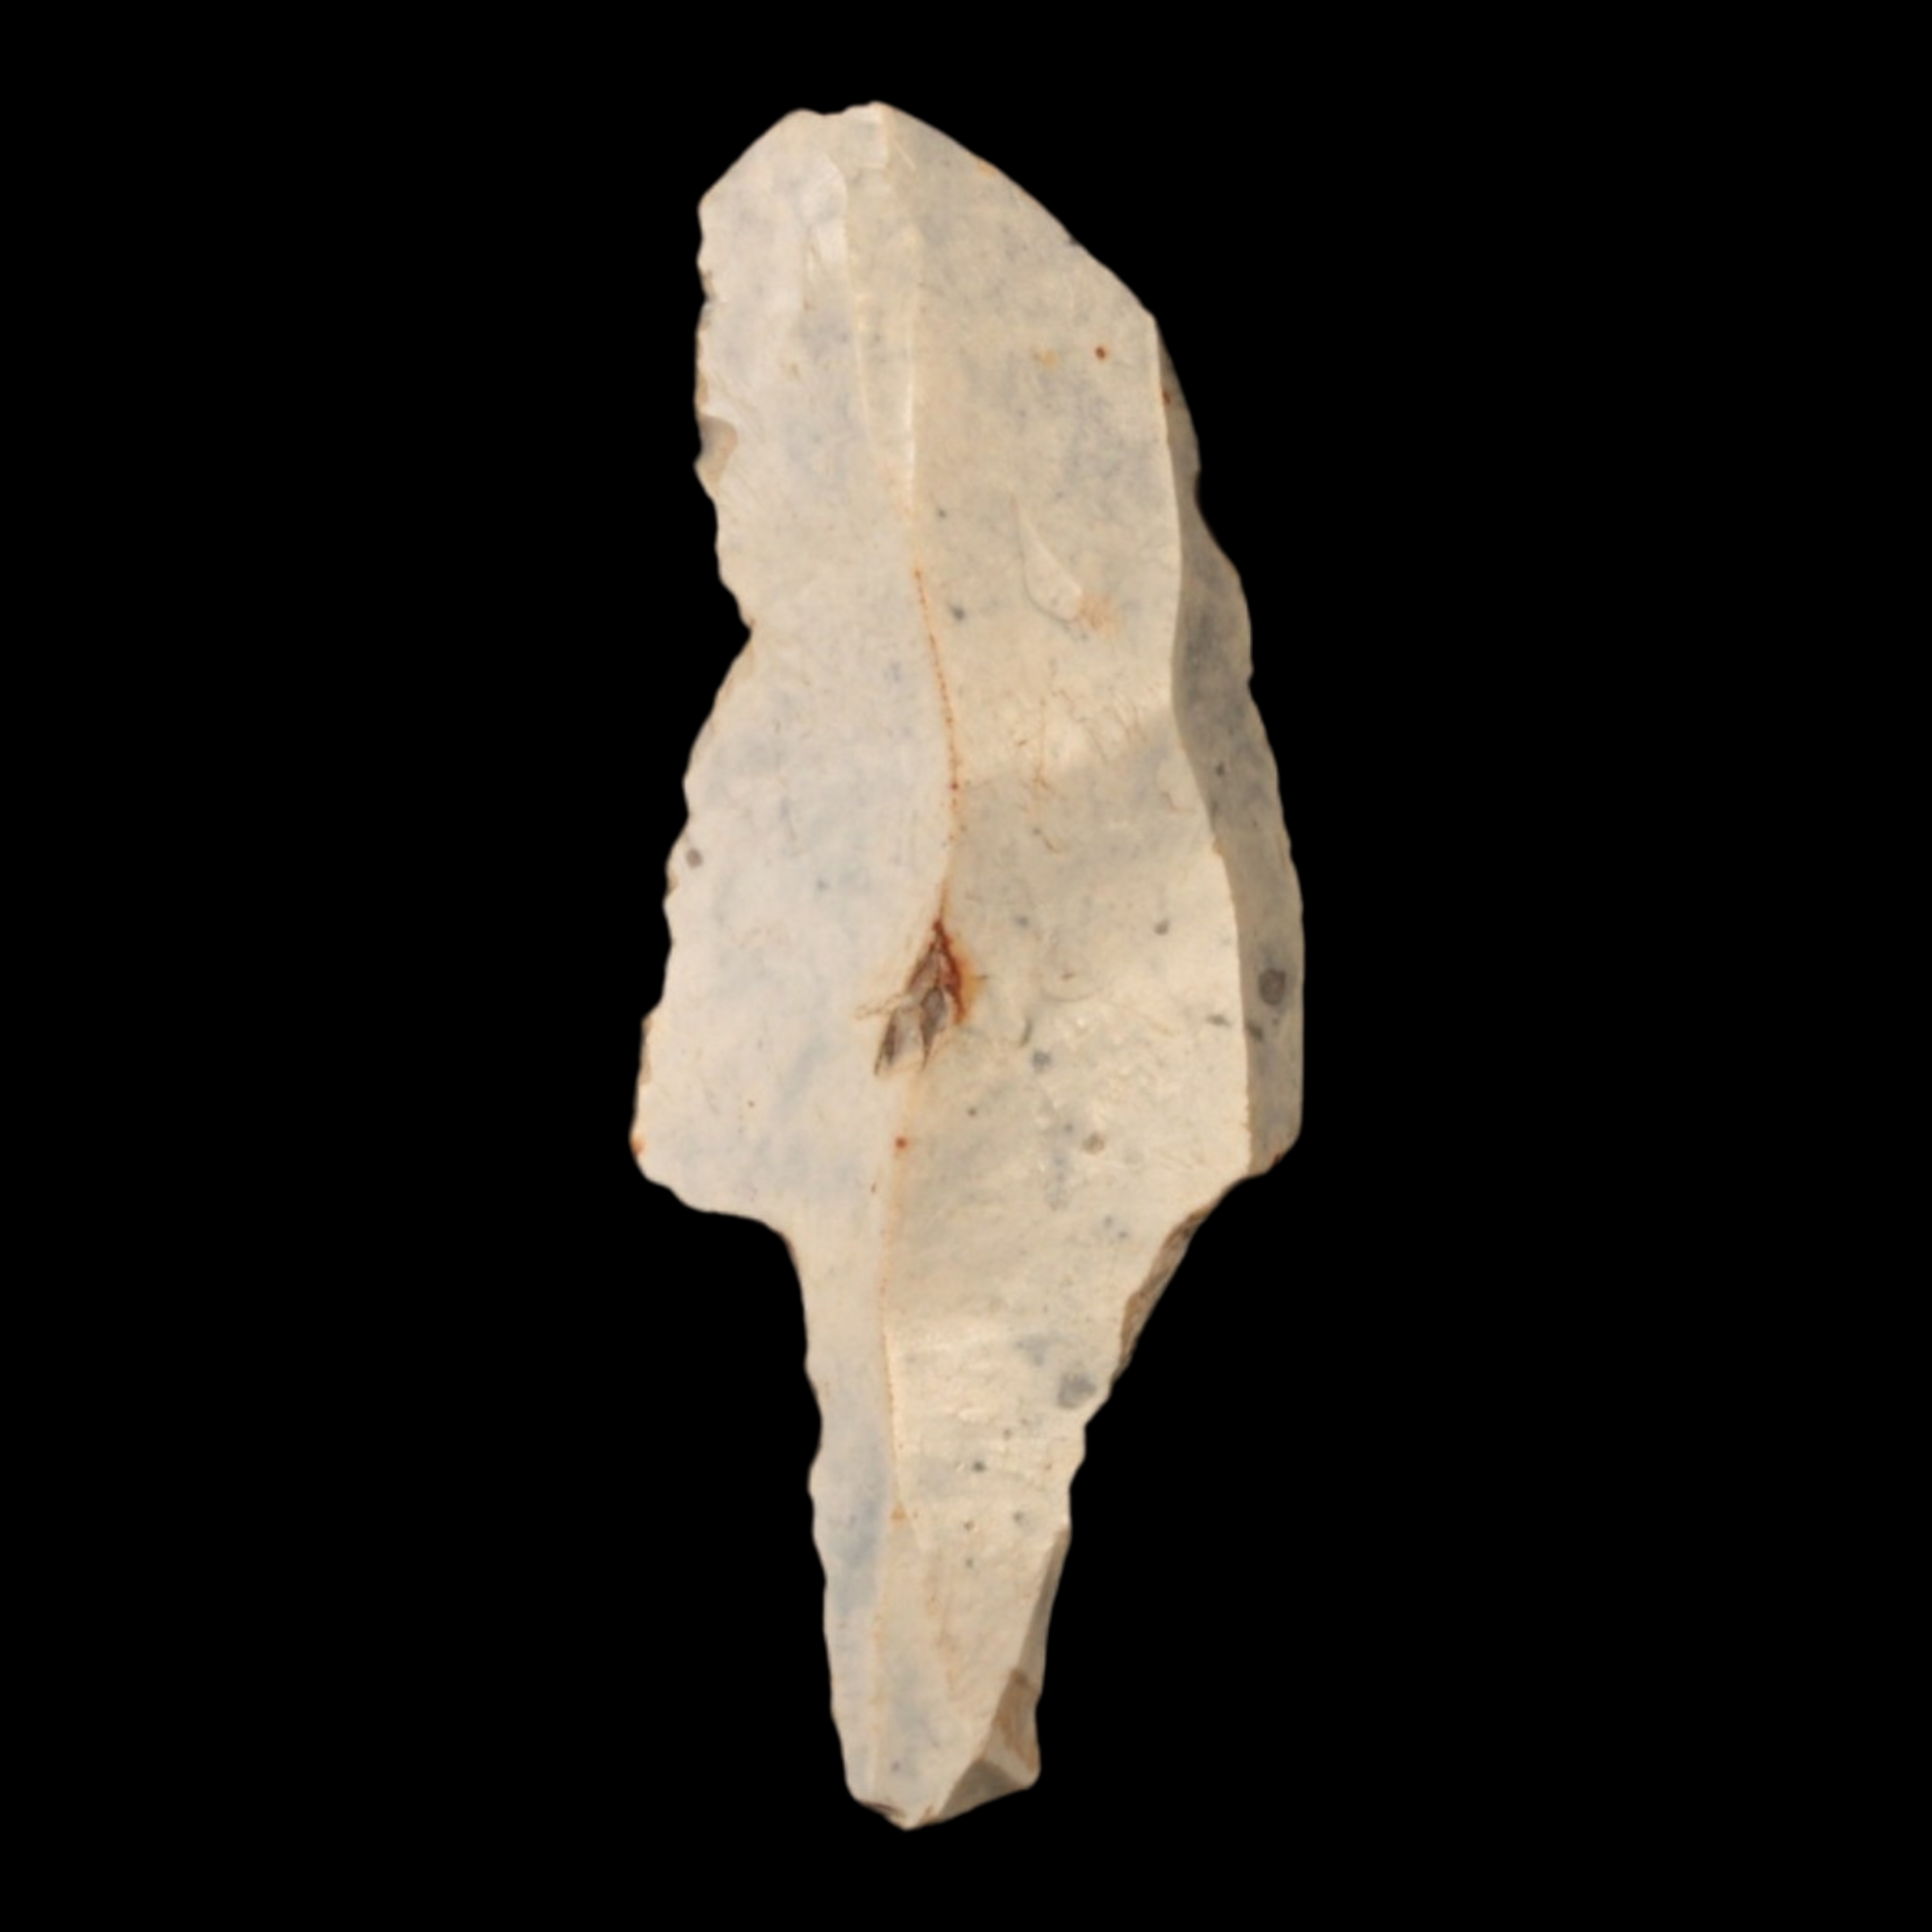 Danish Mesolithic Stone Tool, 2.0 inches (Arrow or Spear Head) - c. 9000 to 5000 BCE - Denmark - 1/17/23 Auction